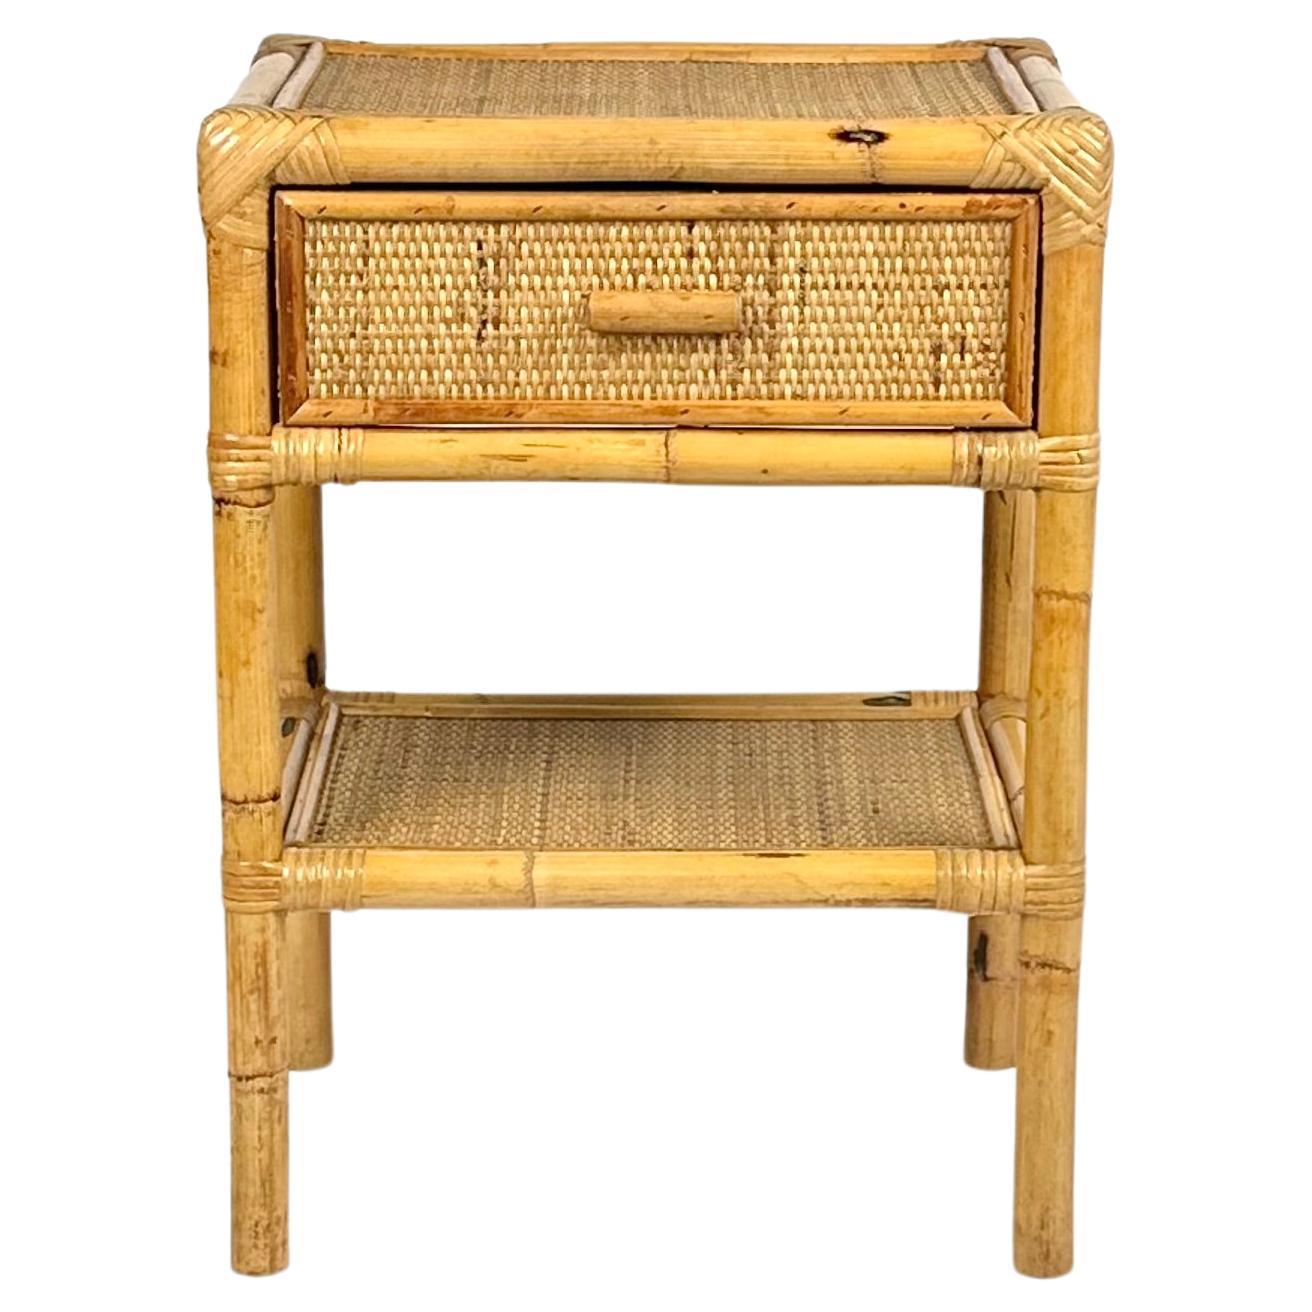 Midcentury Bedside Table Nightstand in Bamboo & Rattan, Italy, 1970s For Sale